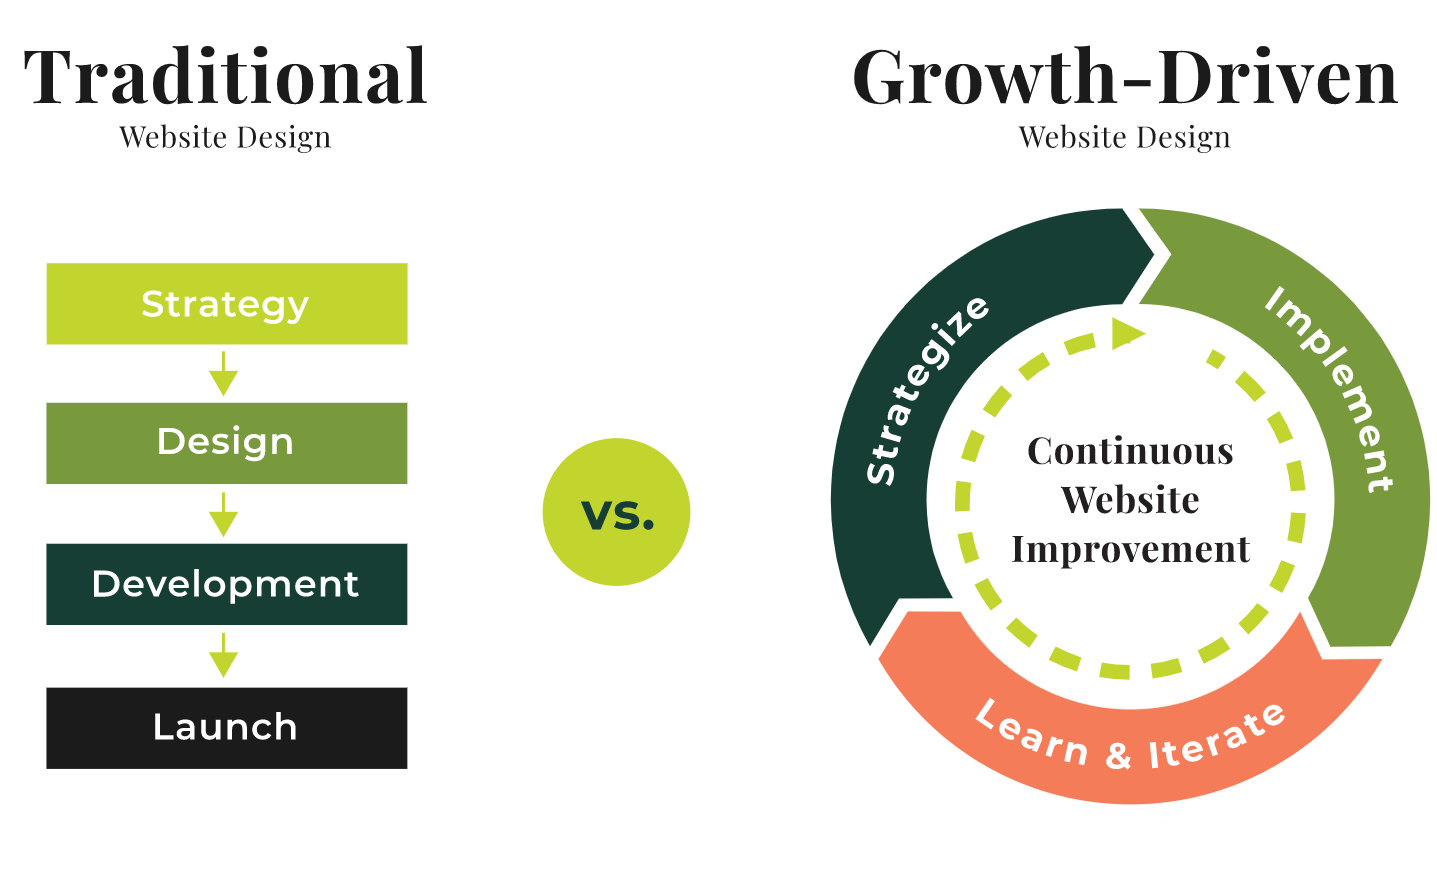 Two graphics that compare traditional and growth-driven website design processes